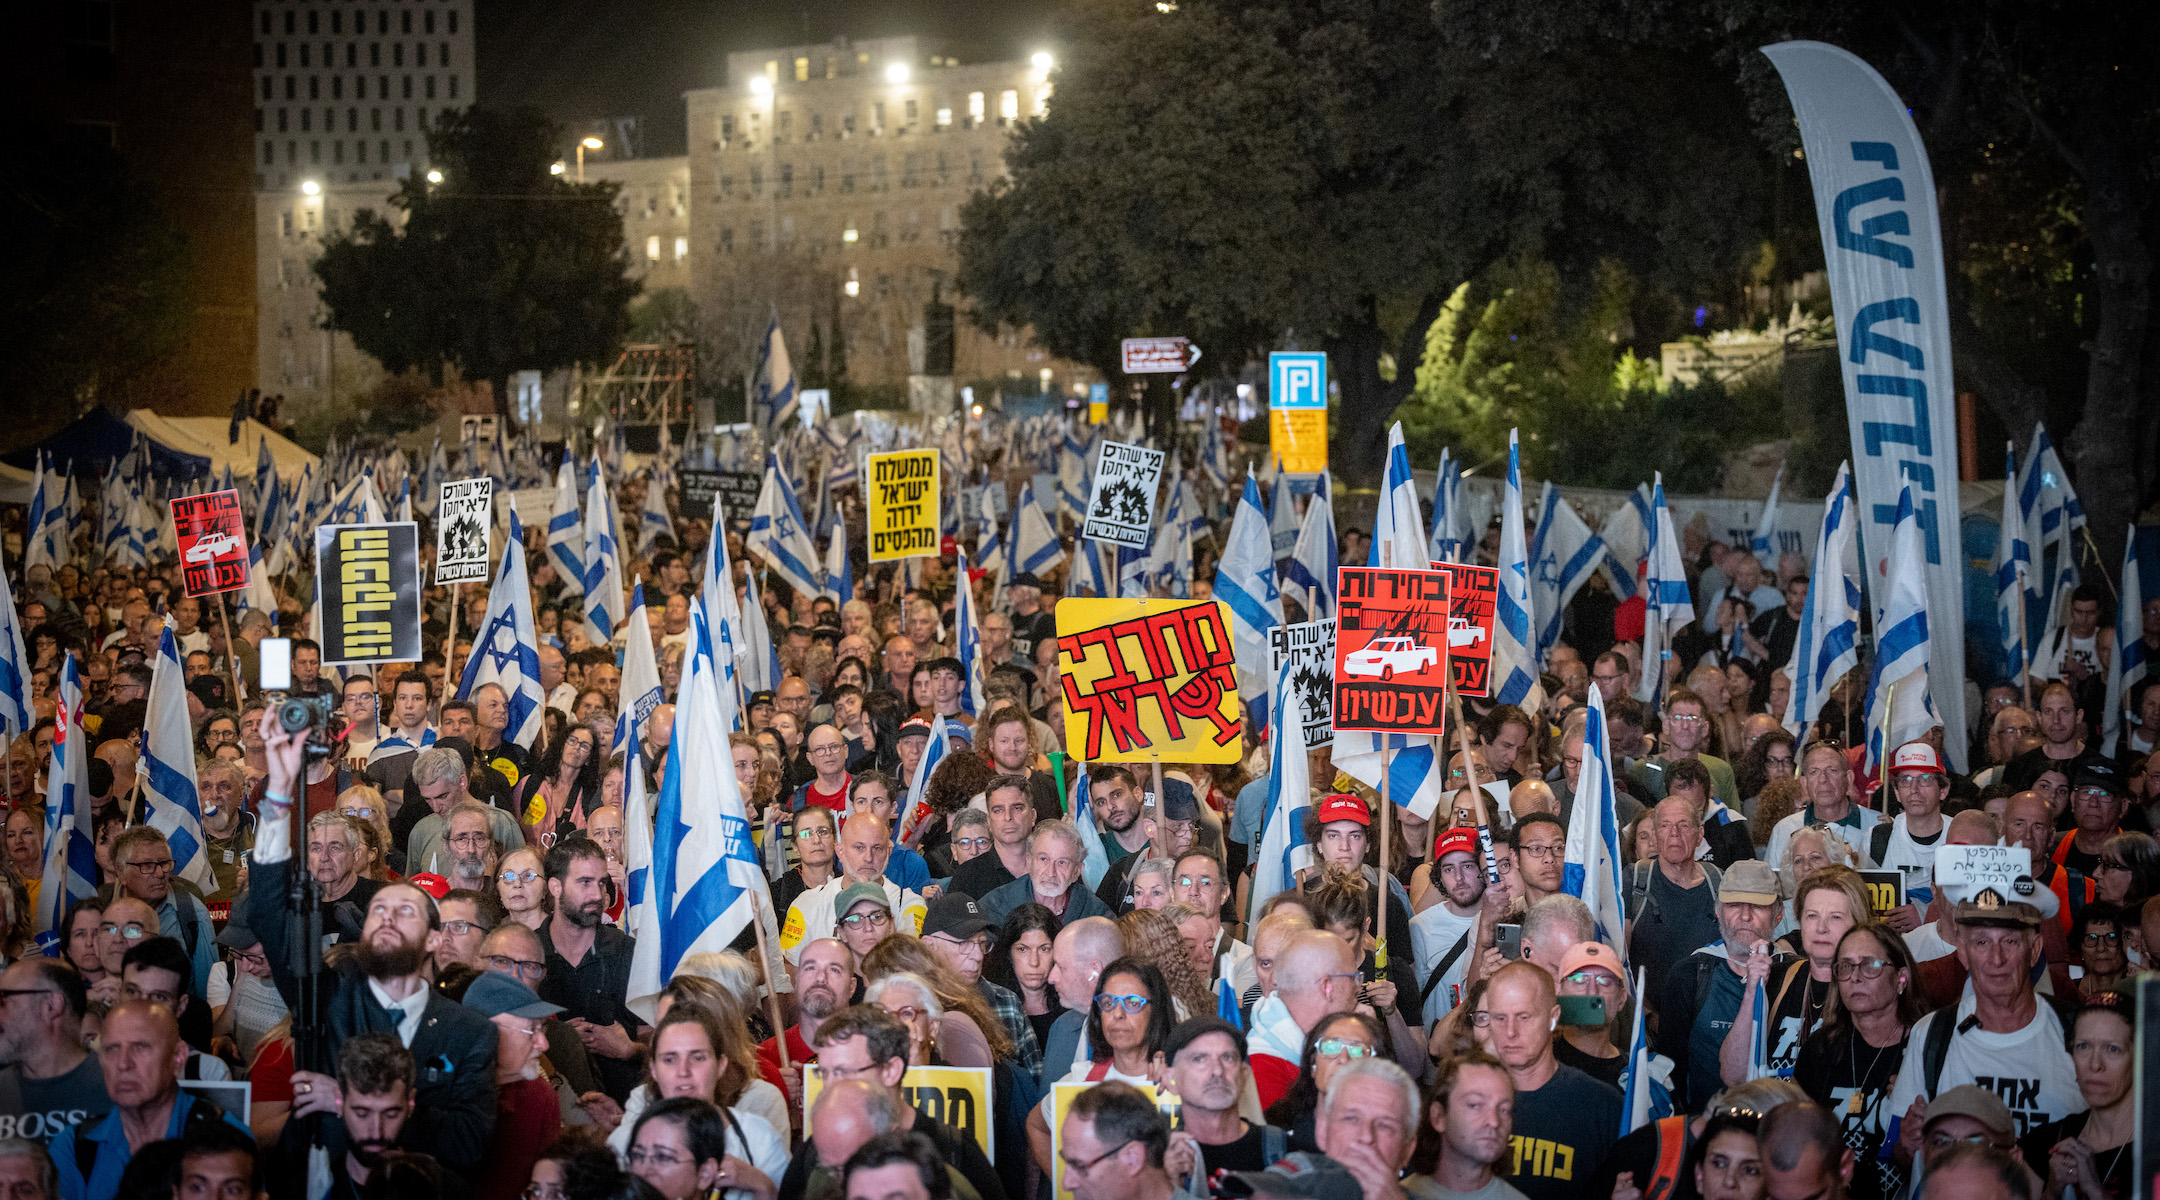 Protests against Netanyahu escalate in Israel as thousands mass in Jerusalem and Tel Aviv